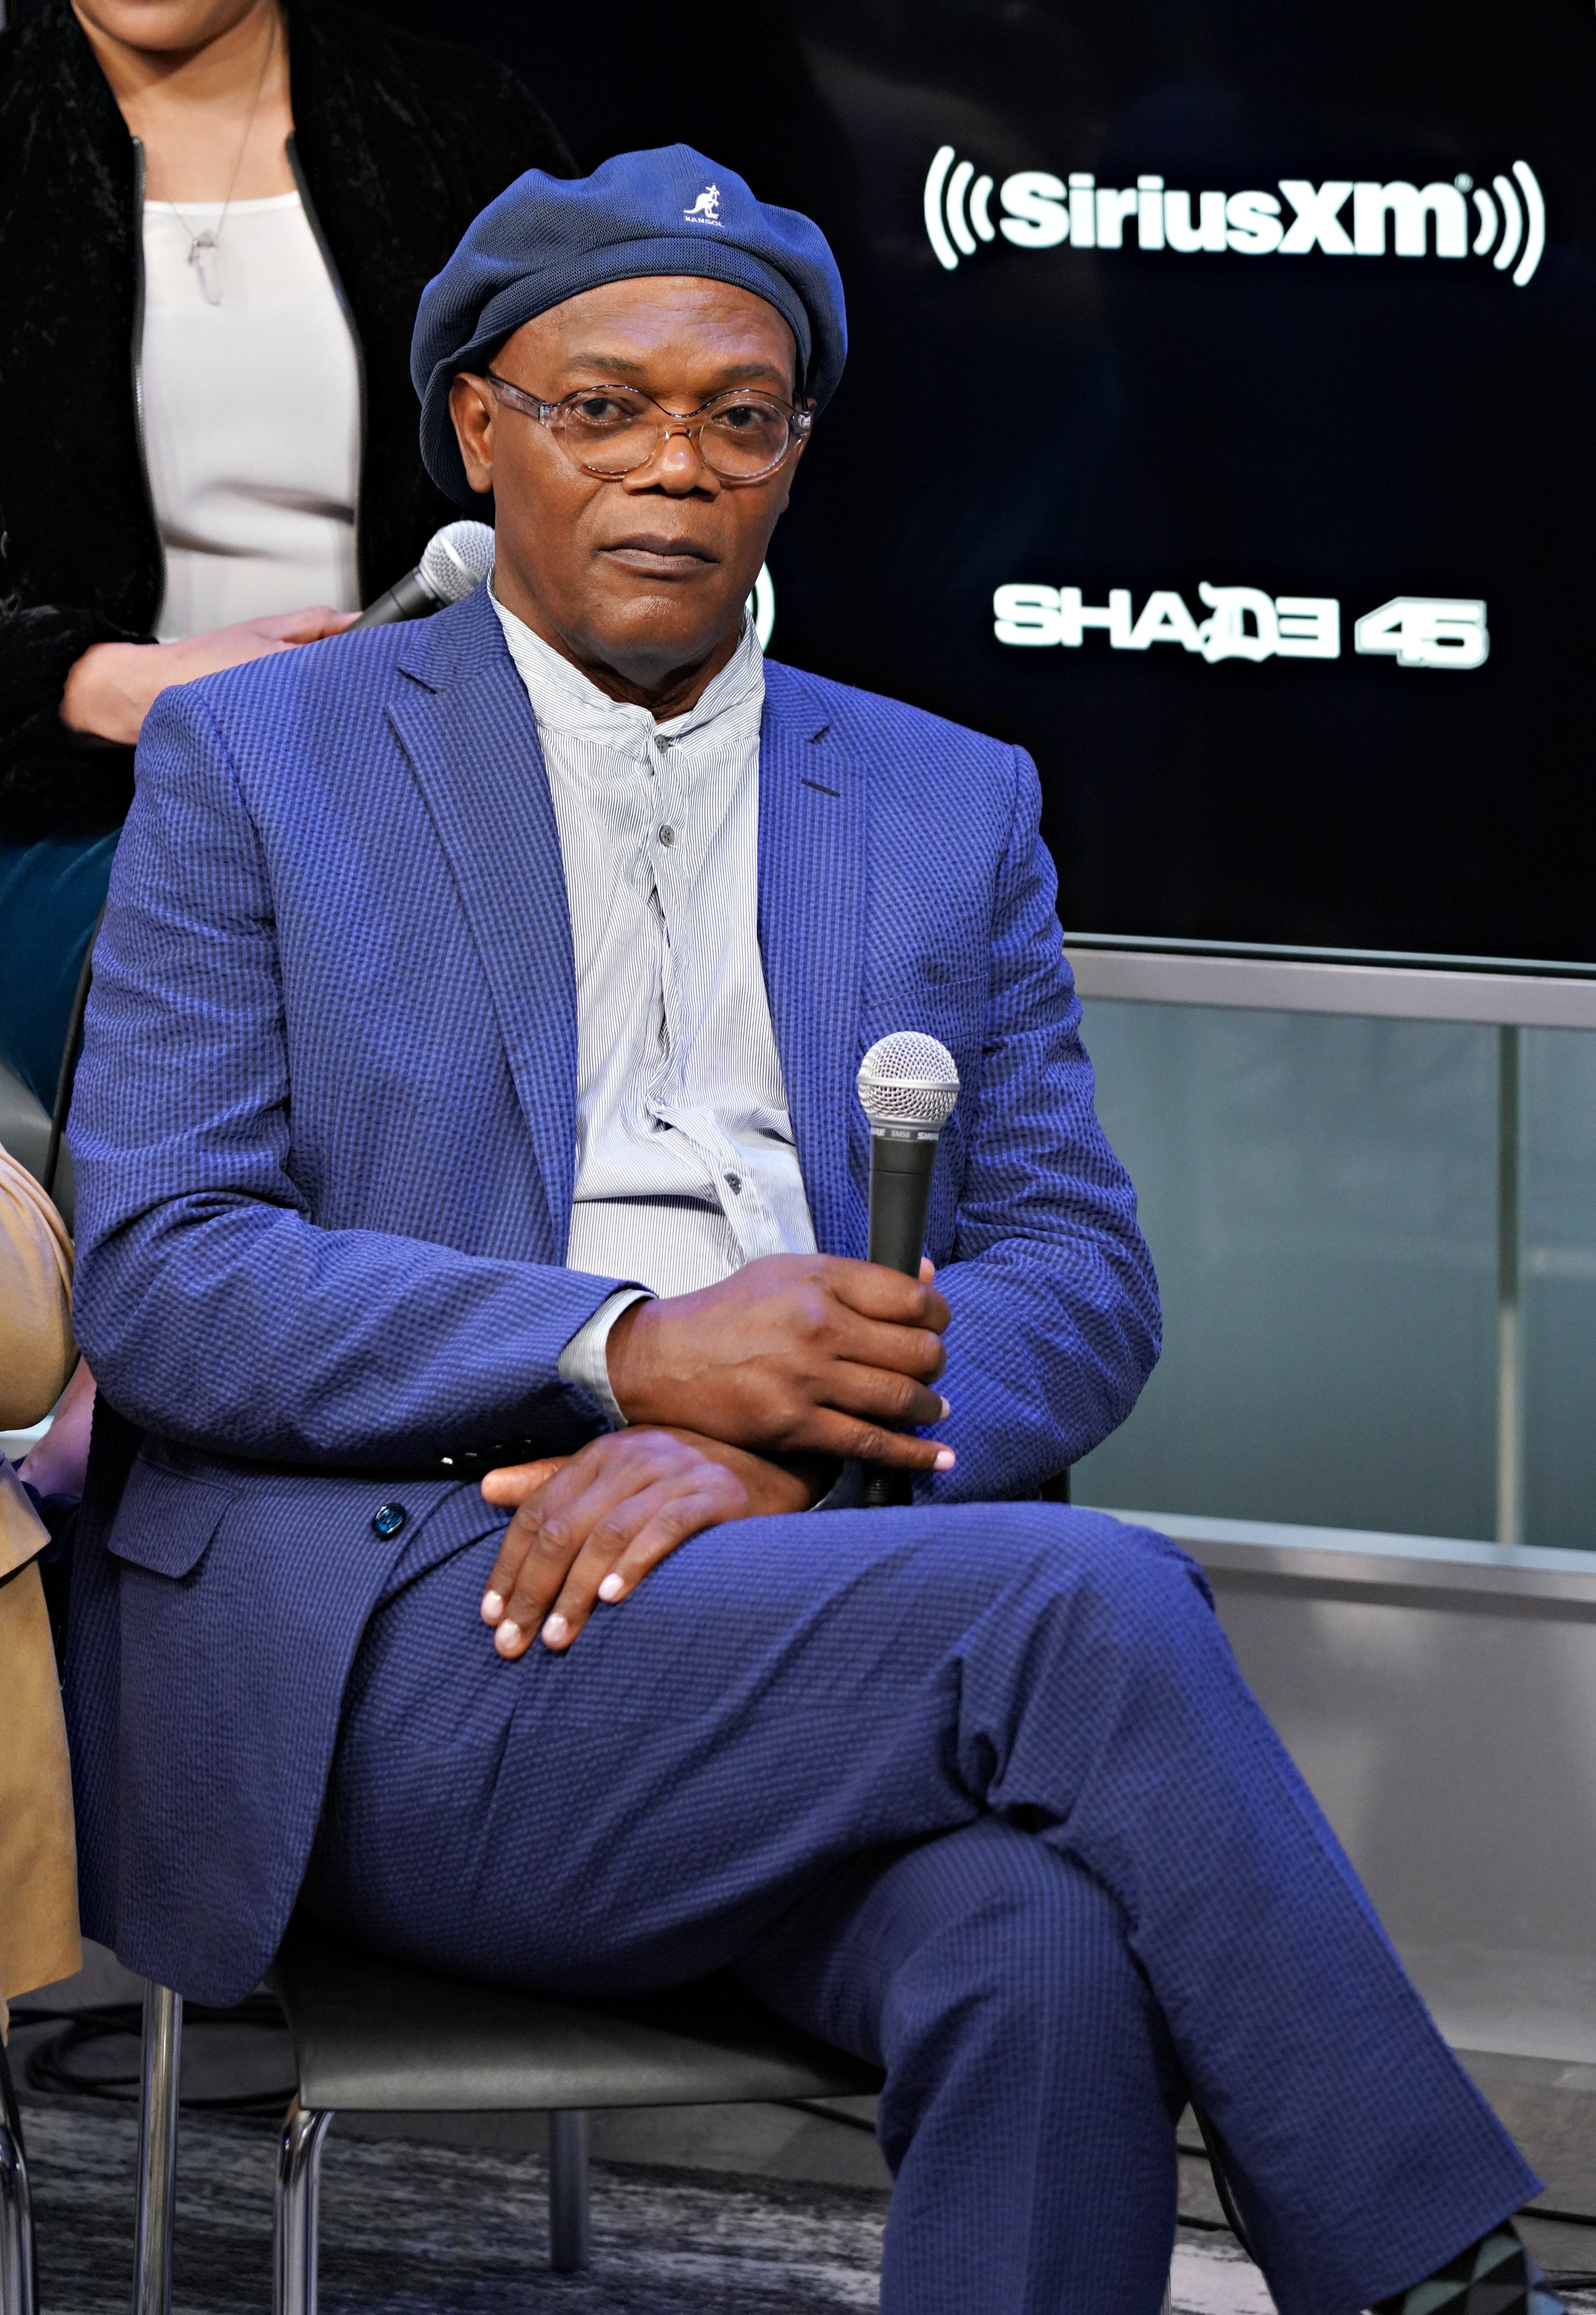 Samuel L Jackson takes part in SiriusXM's Town Hall with the cast of 'Shaft' at SiriusXM Studios on June 10, 2019 in New York City | Photo: Getty Images